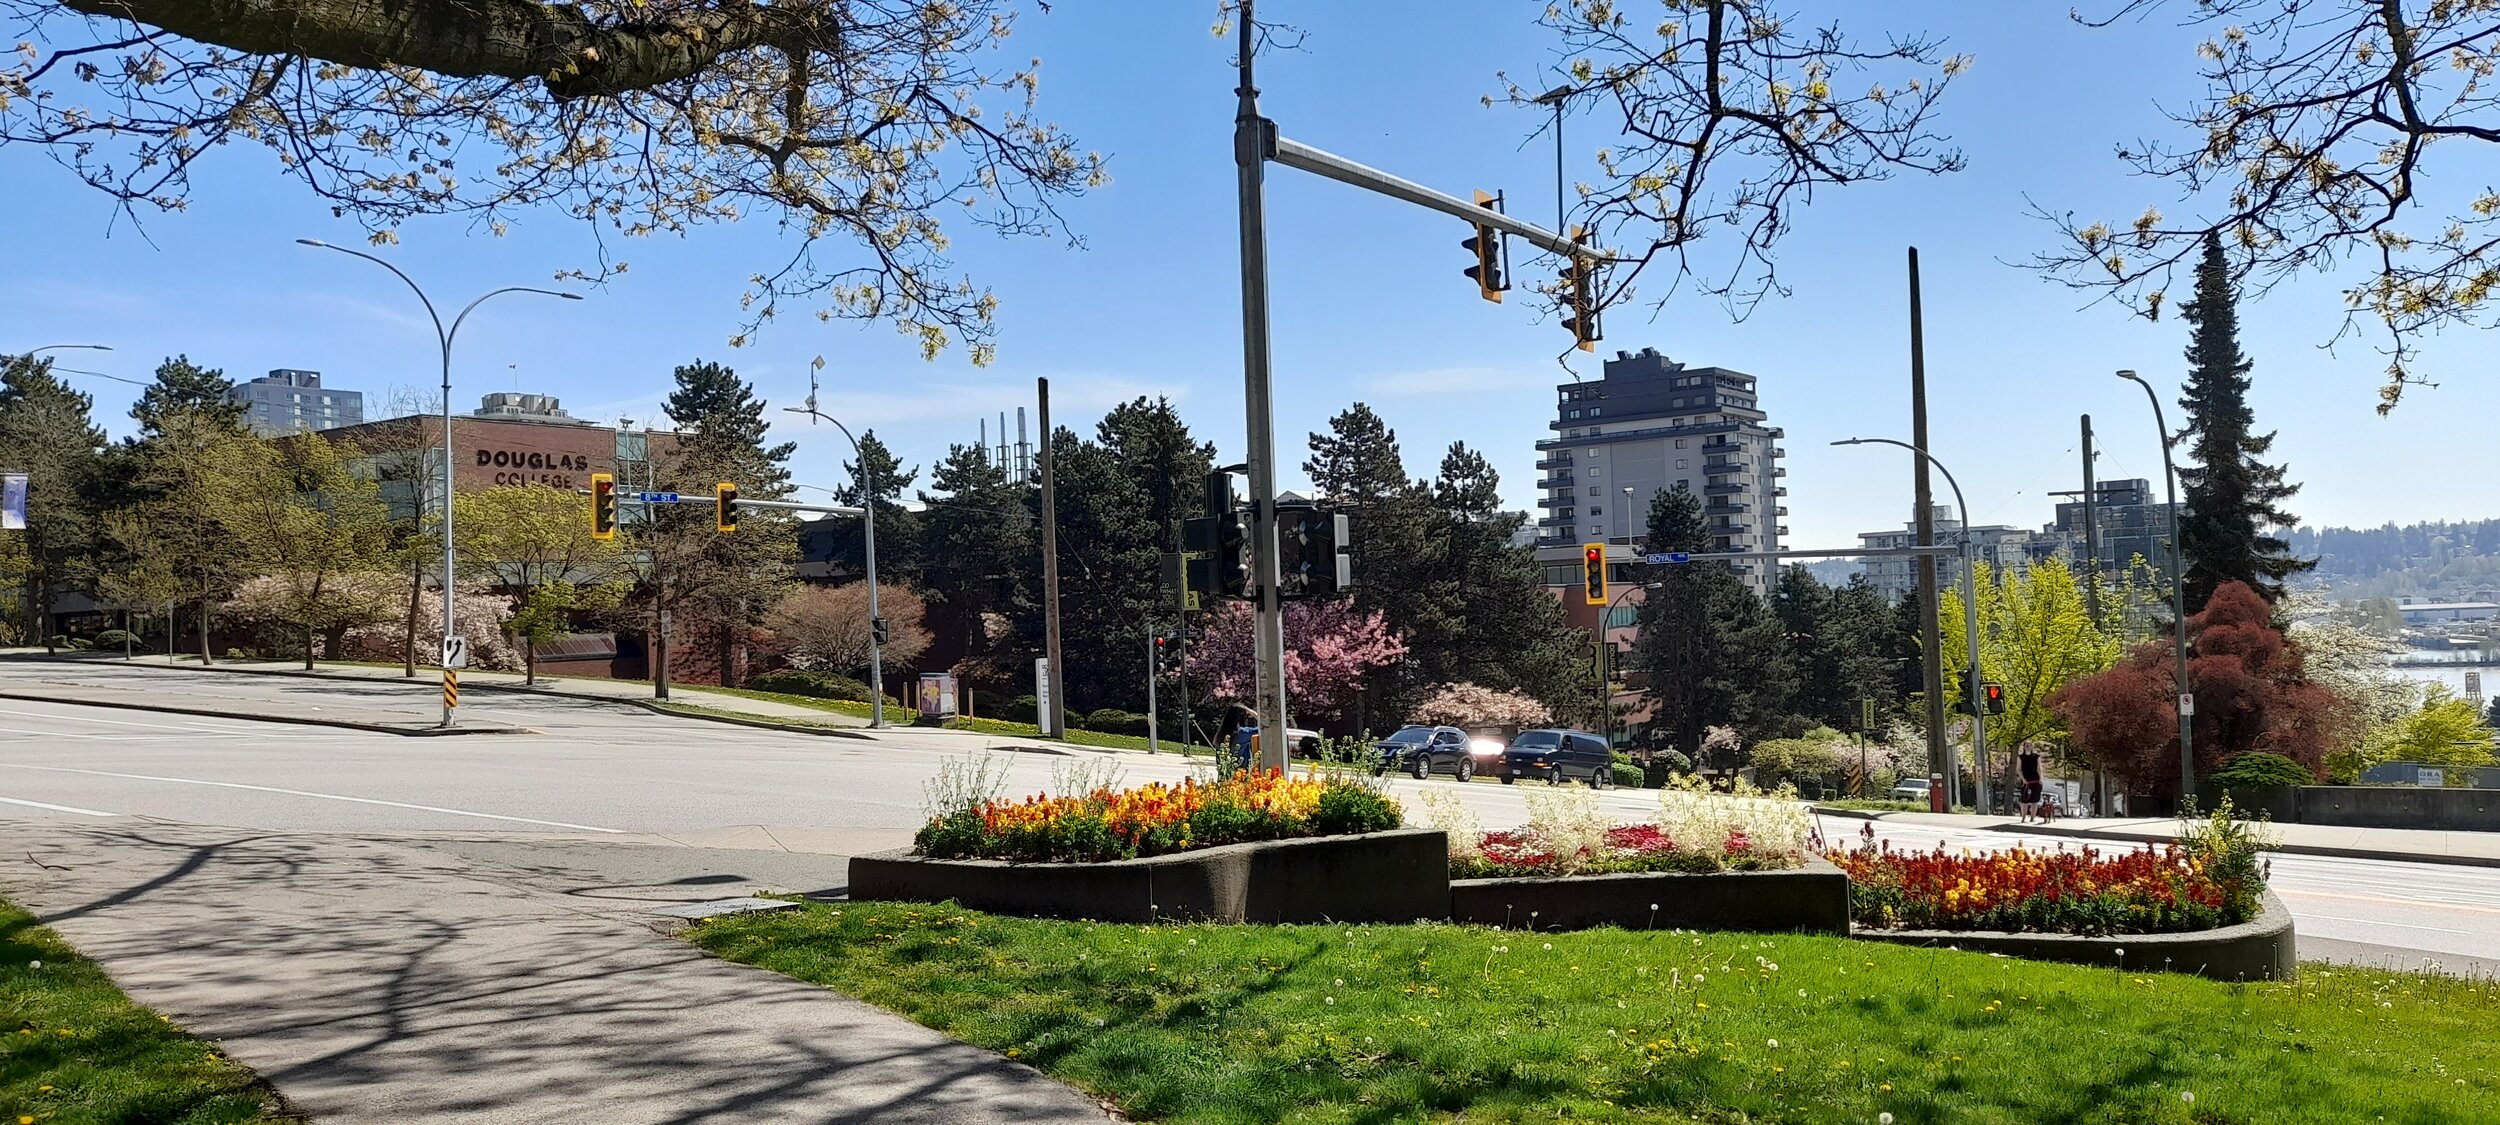 Simcoe Park and intersection